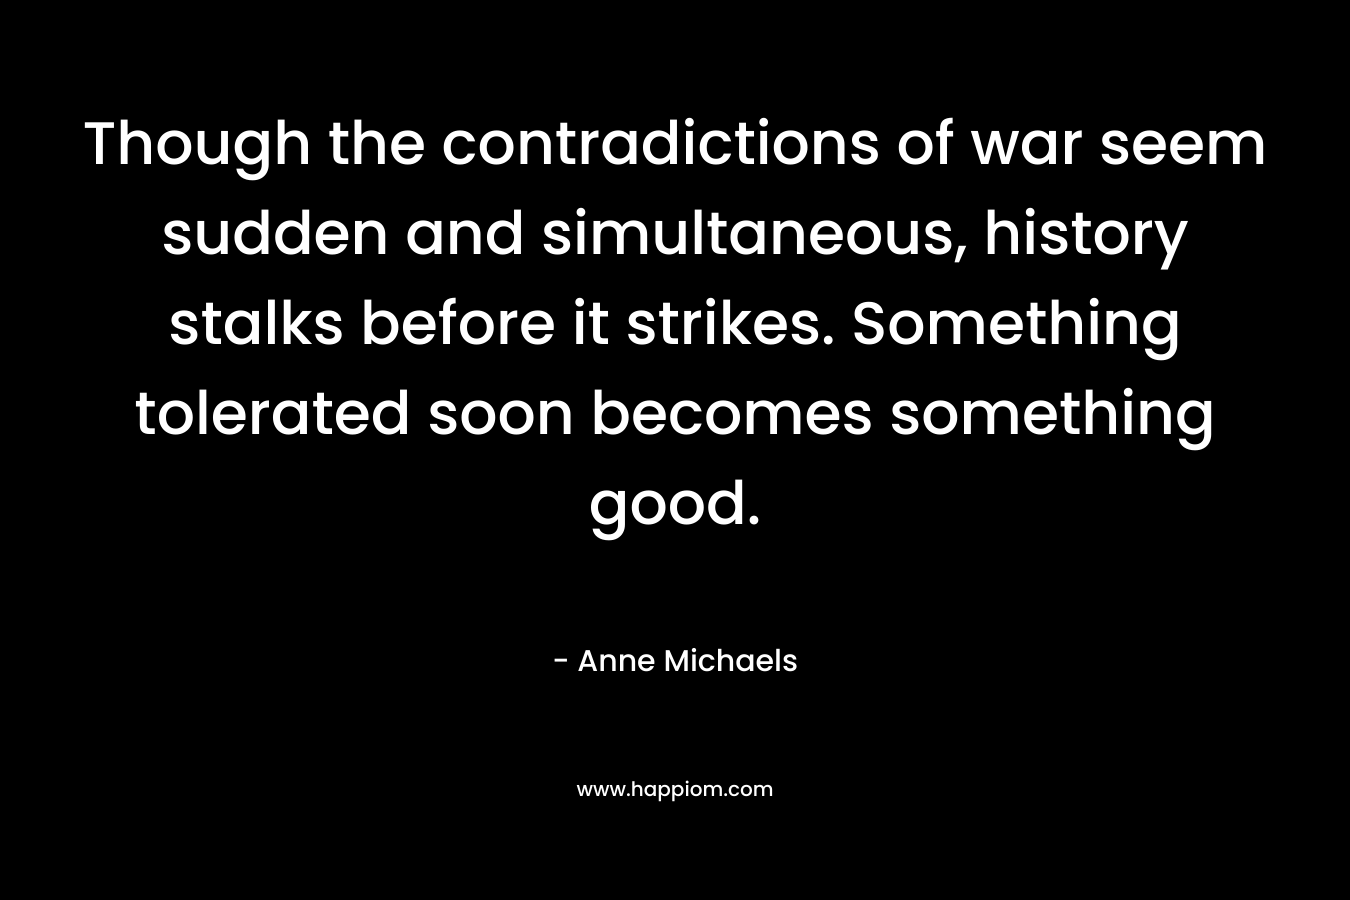 Though the contradictions of war seem sudden and simultaneous, history stalks before it strikes. Something tolerated soon becomes something good. – Anne Michaels